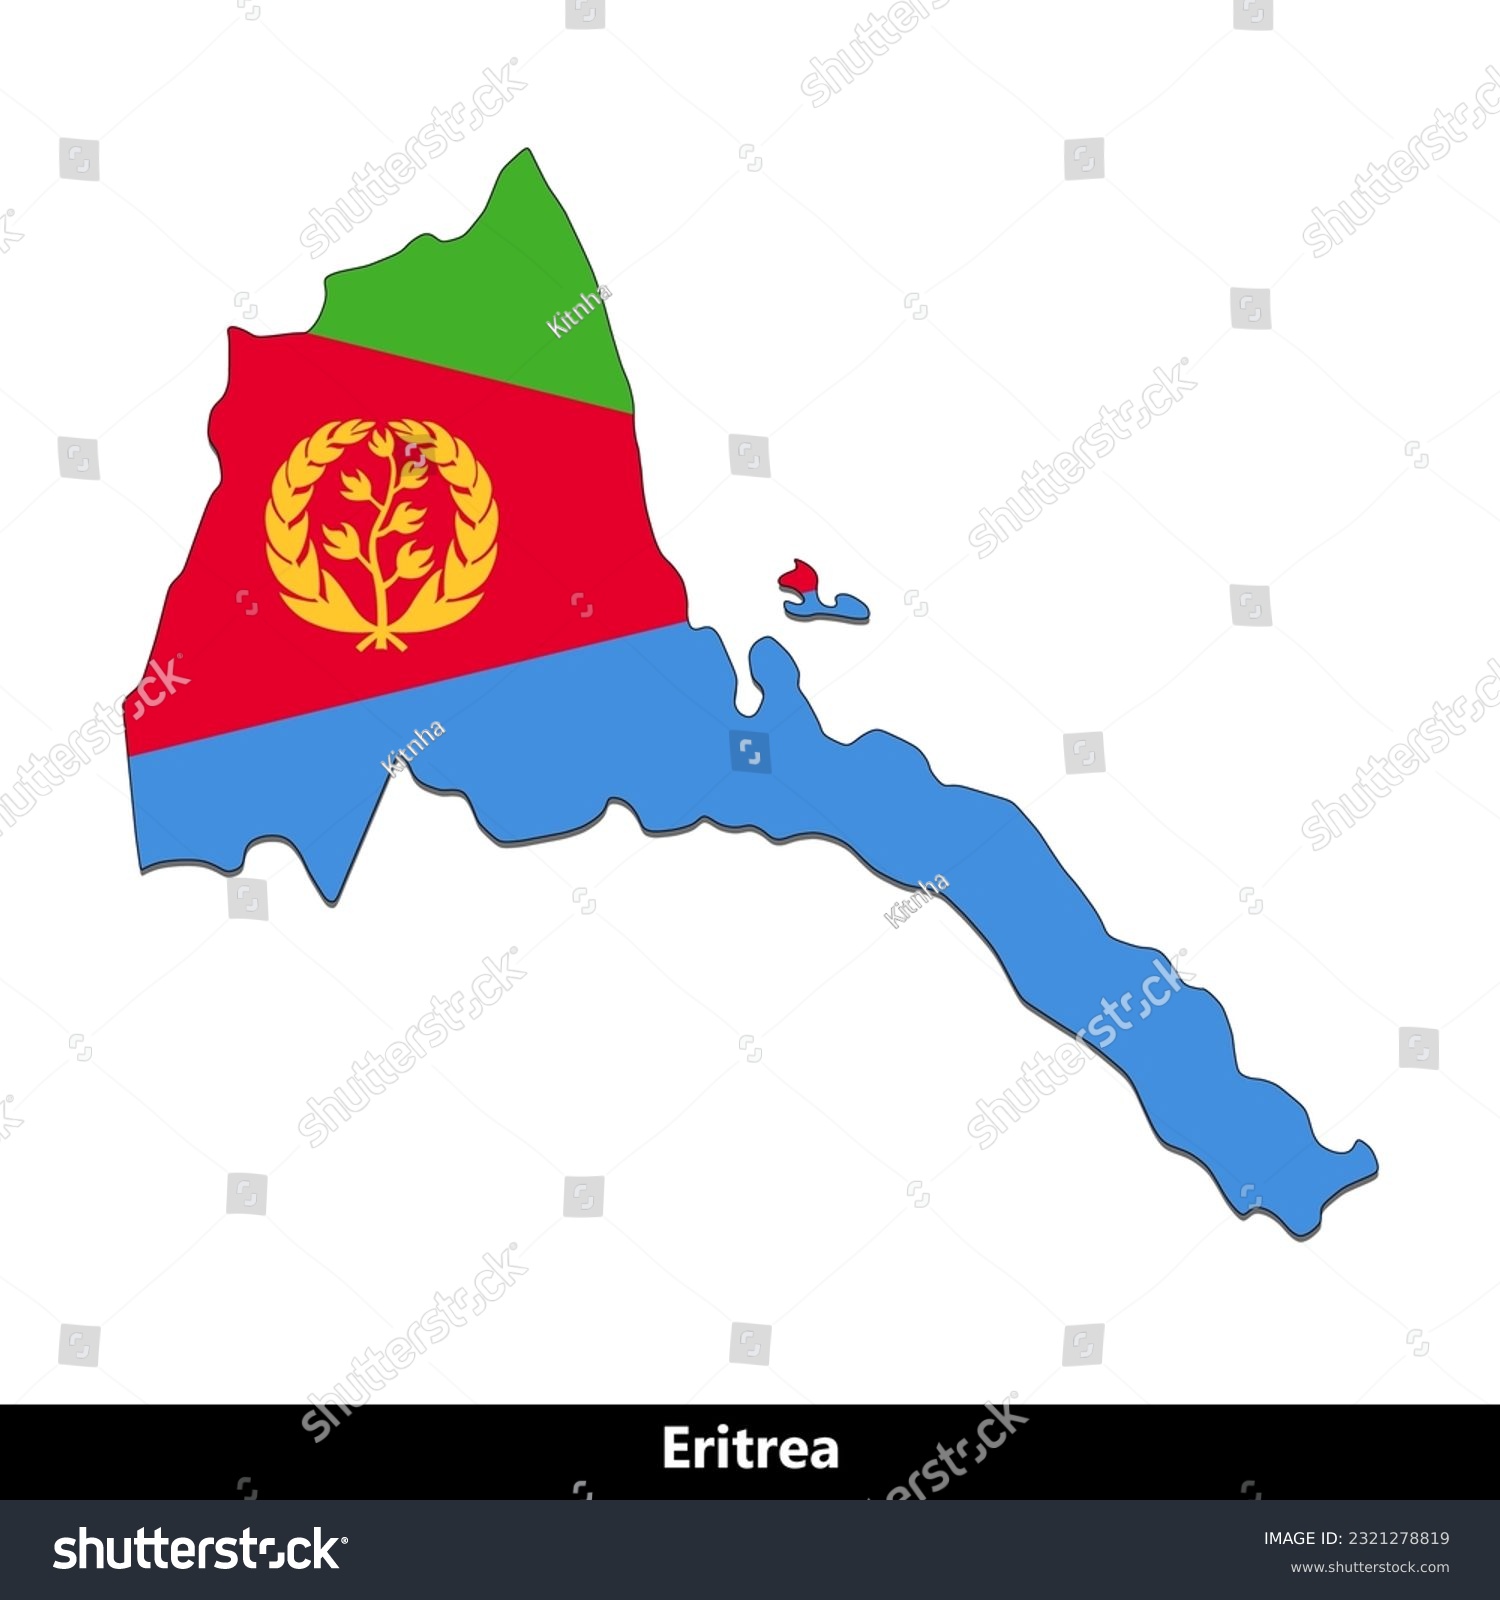 Eritrea Country Flag Map Royalty Free Stock Vector 2321278819 